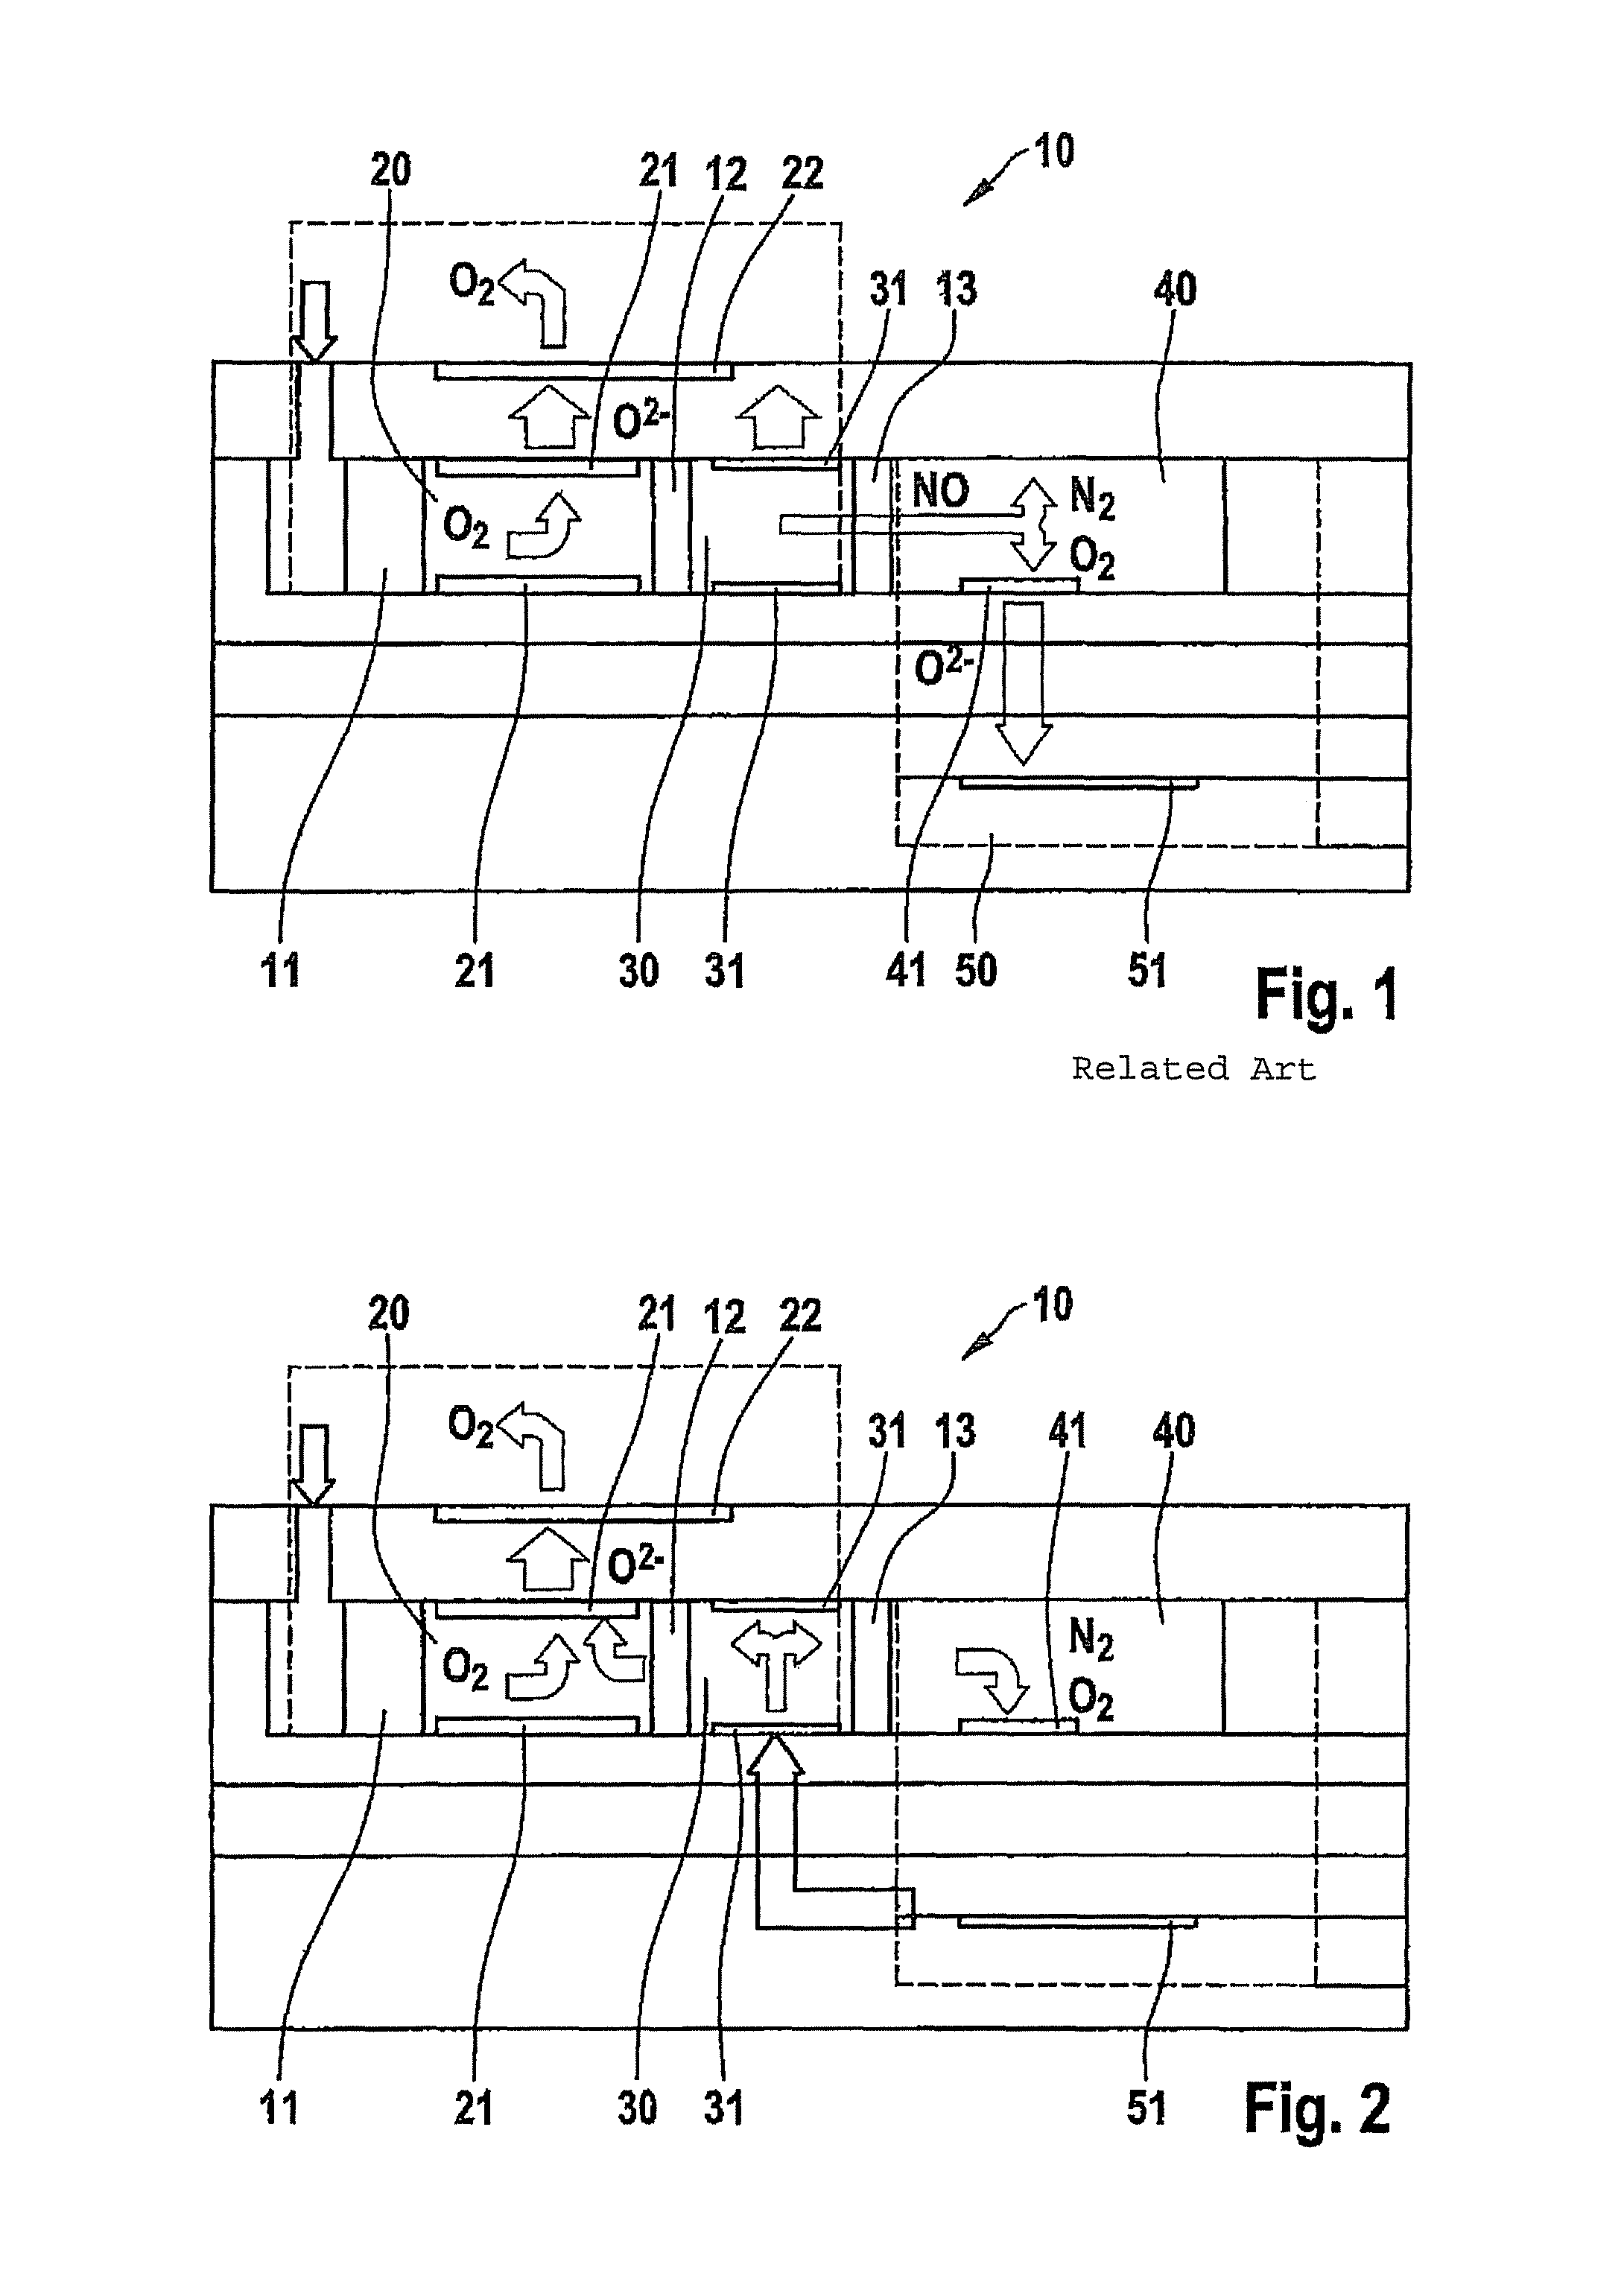 Method for measuring and/or calibrating a gas sensor